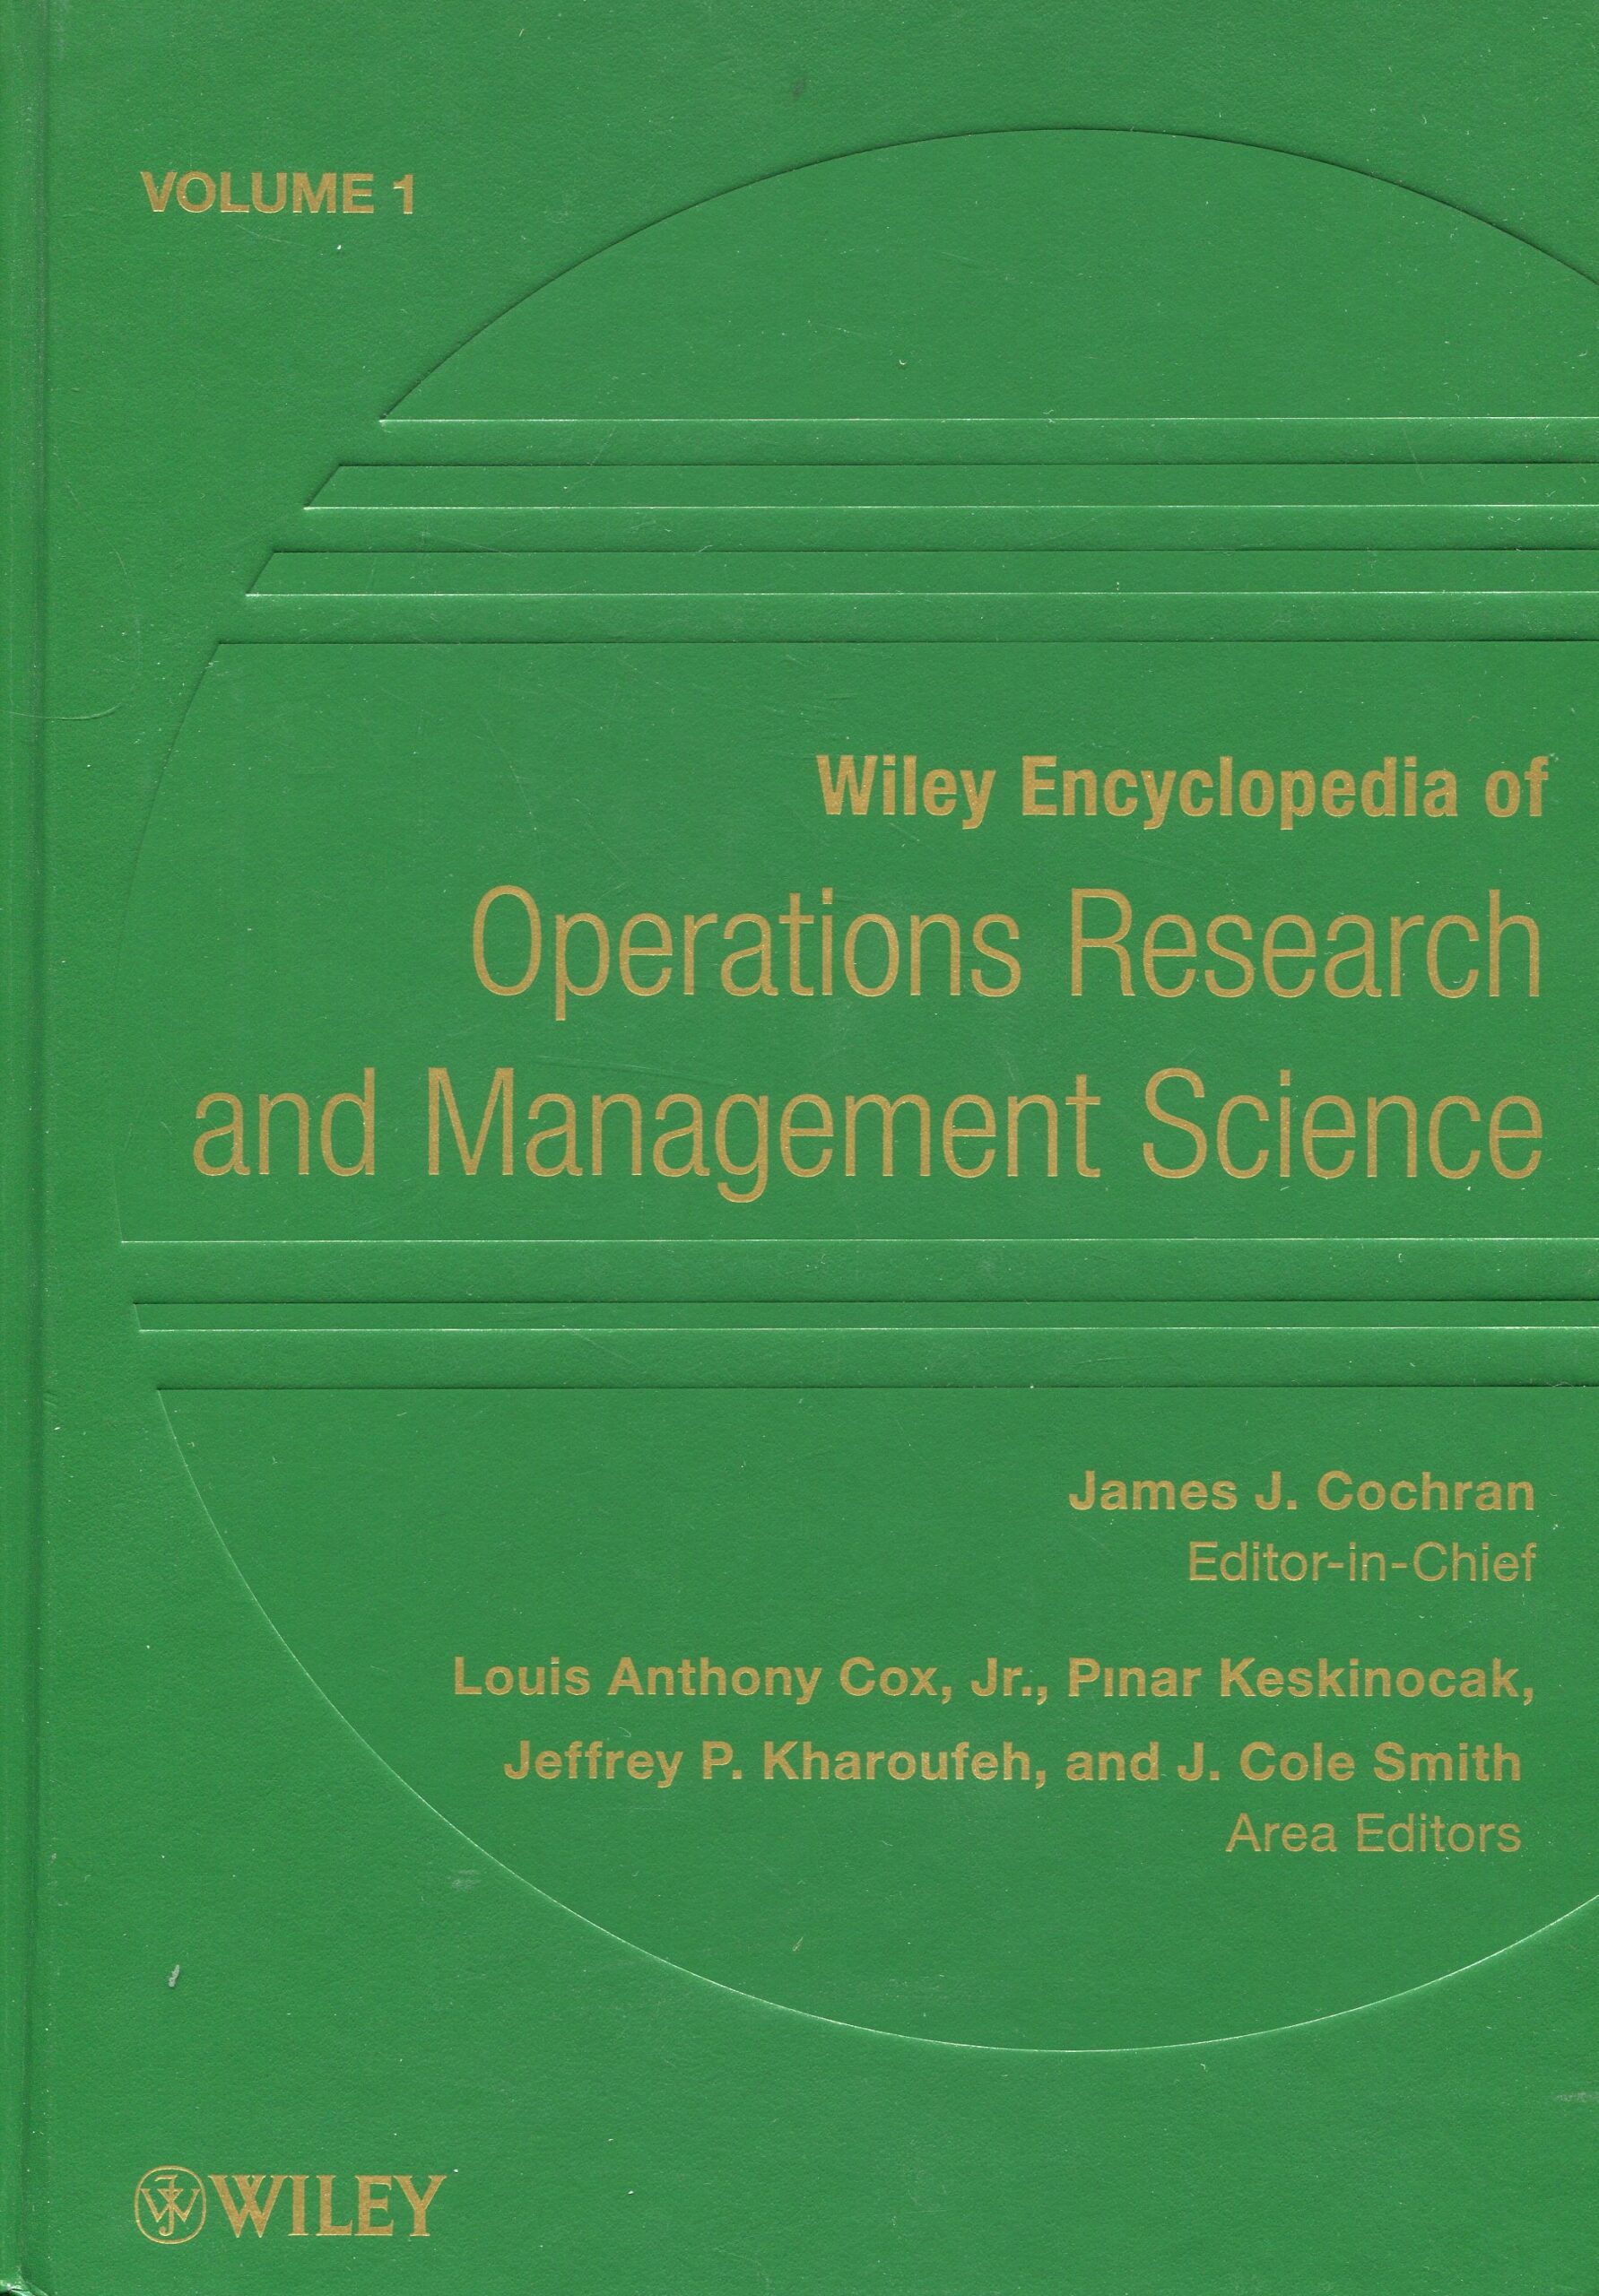 Wiley Encyclopedia of Operations Research and Management 9780470400548